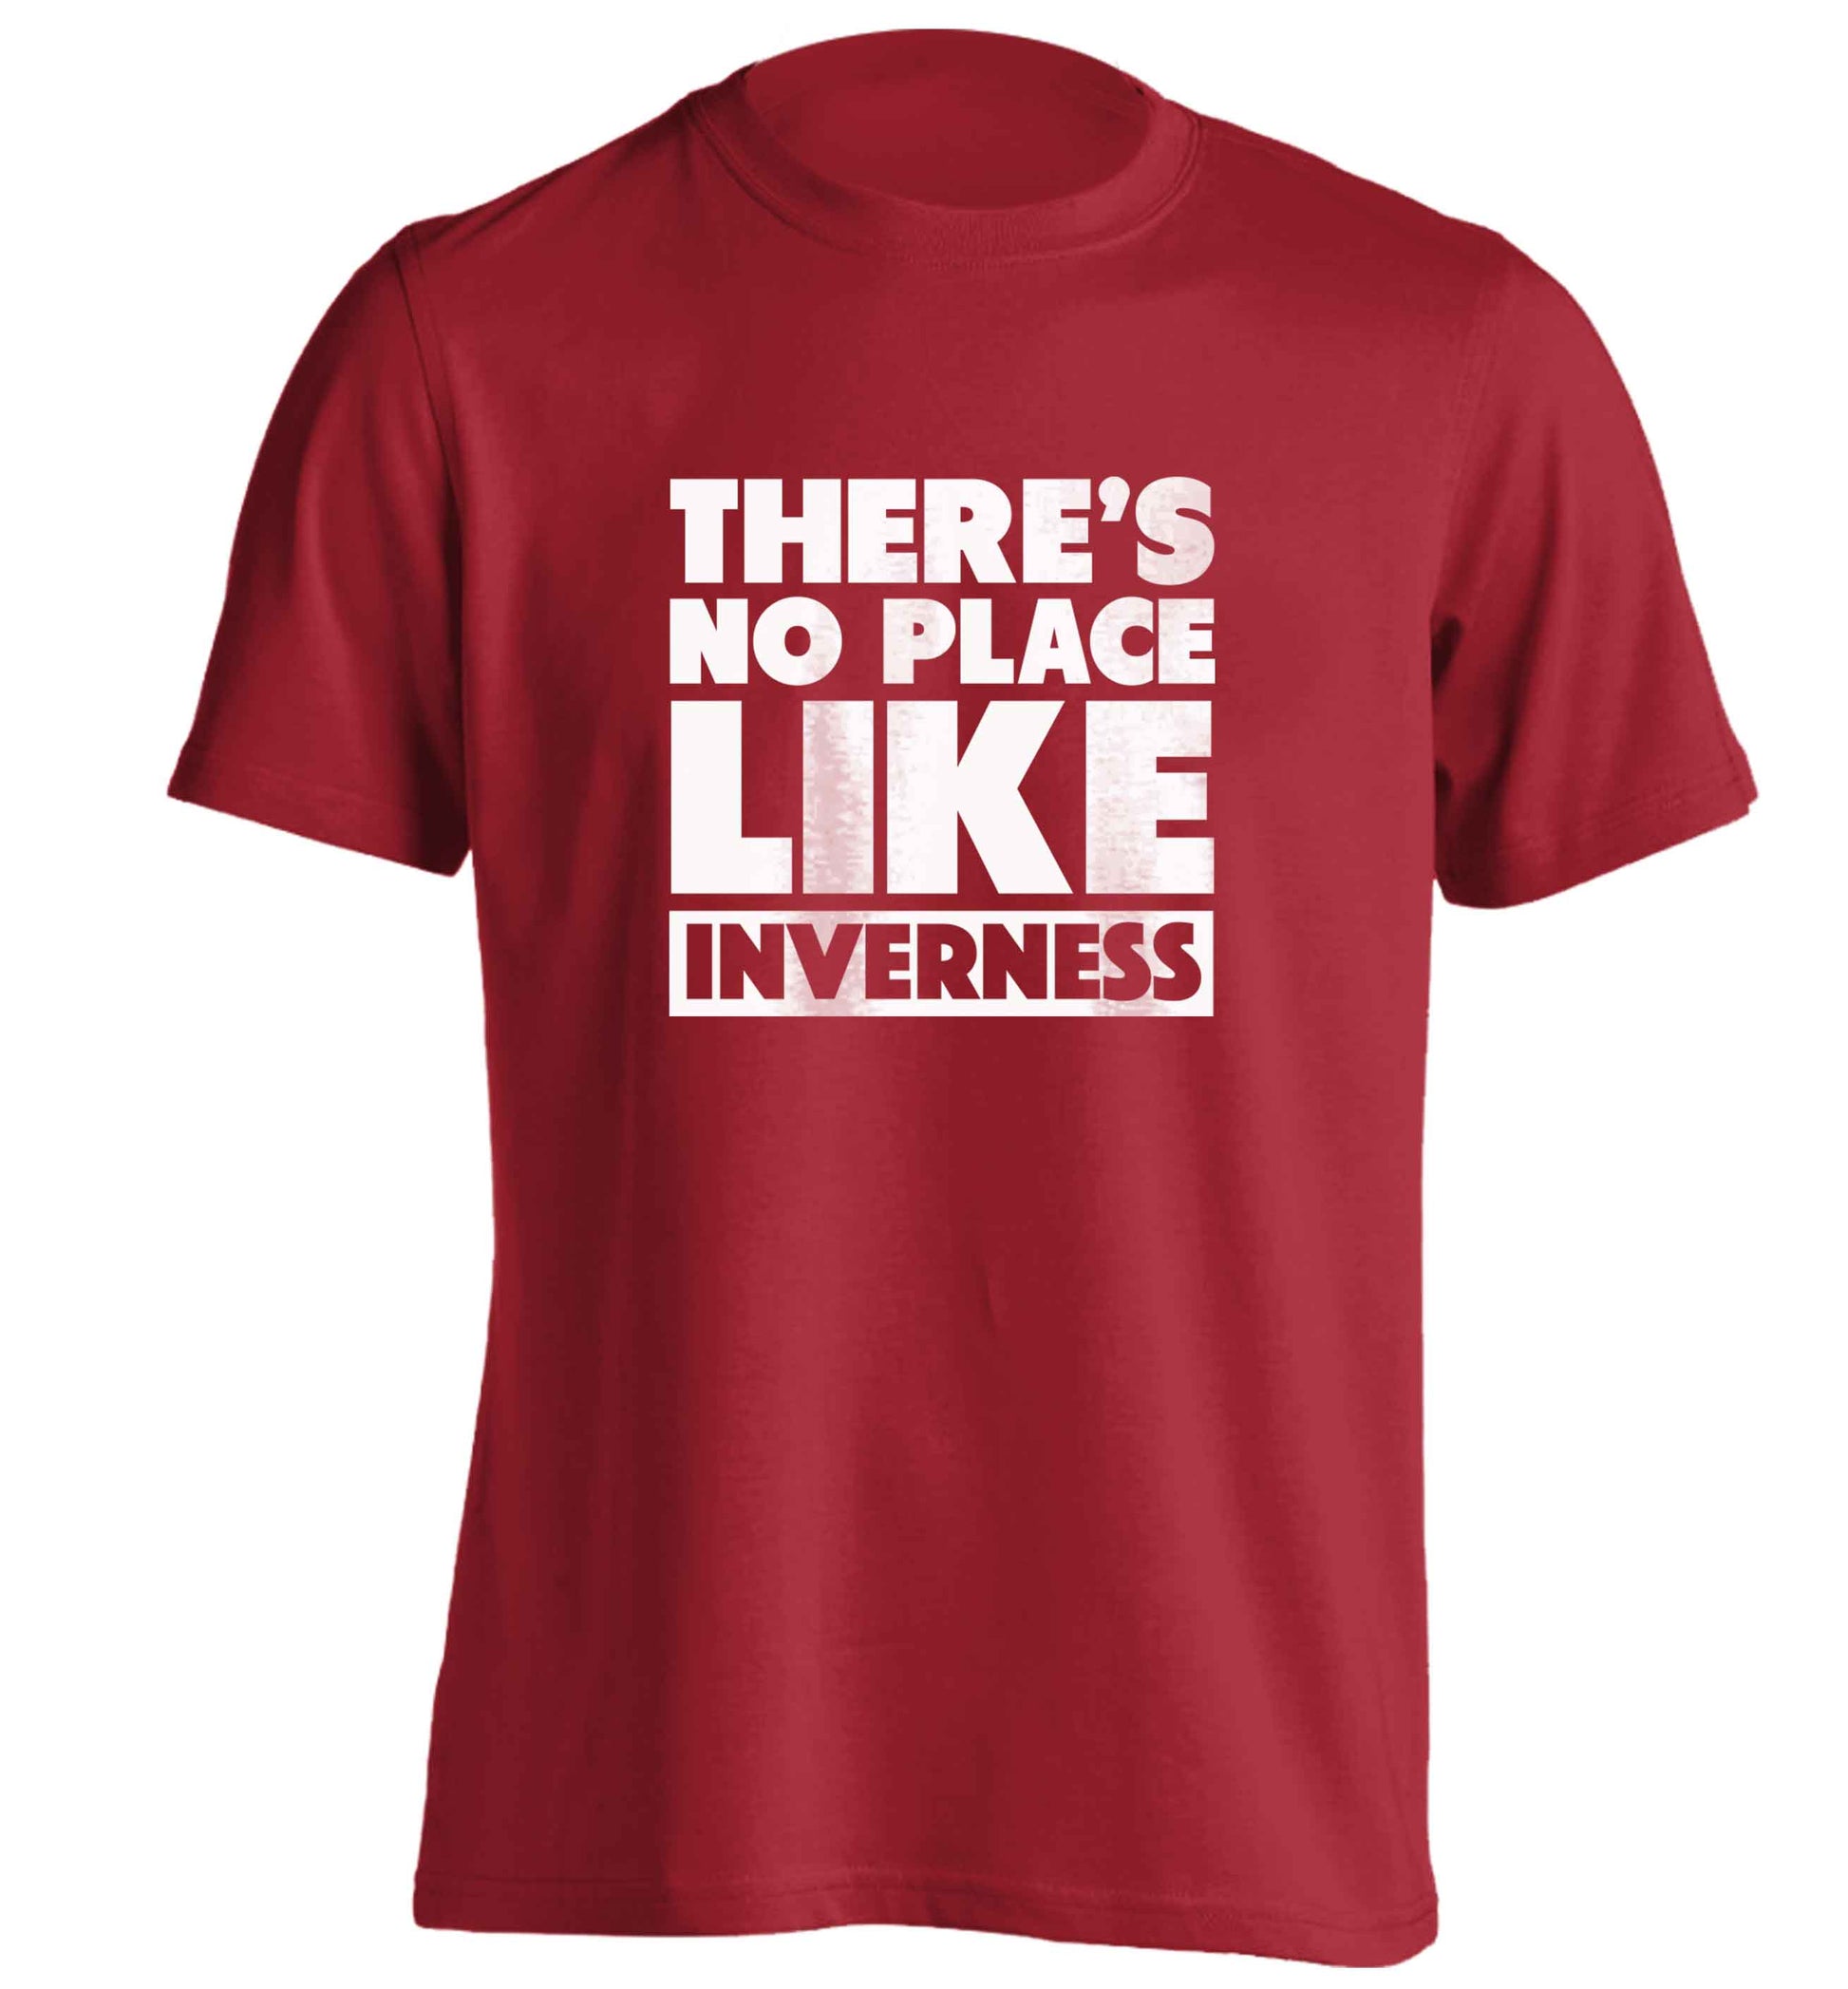 There's no place like Inverness adults unisex red Tshirt 2XL